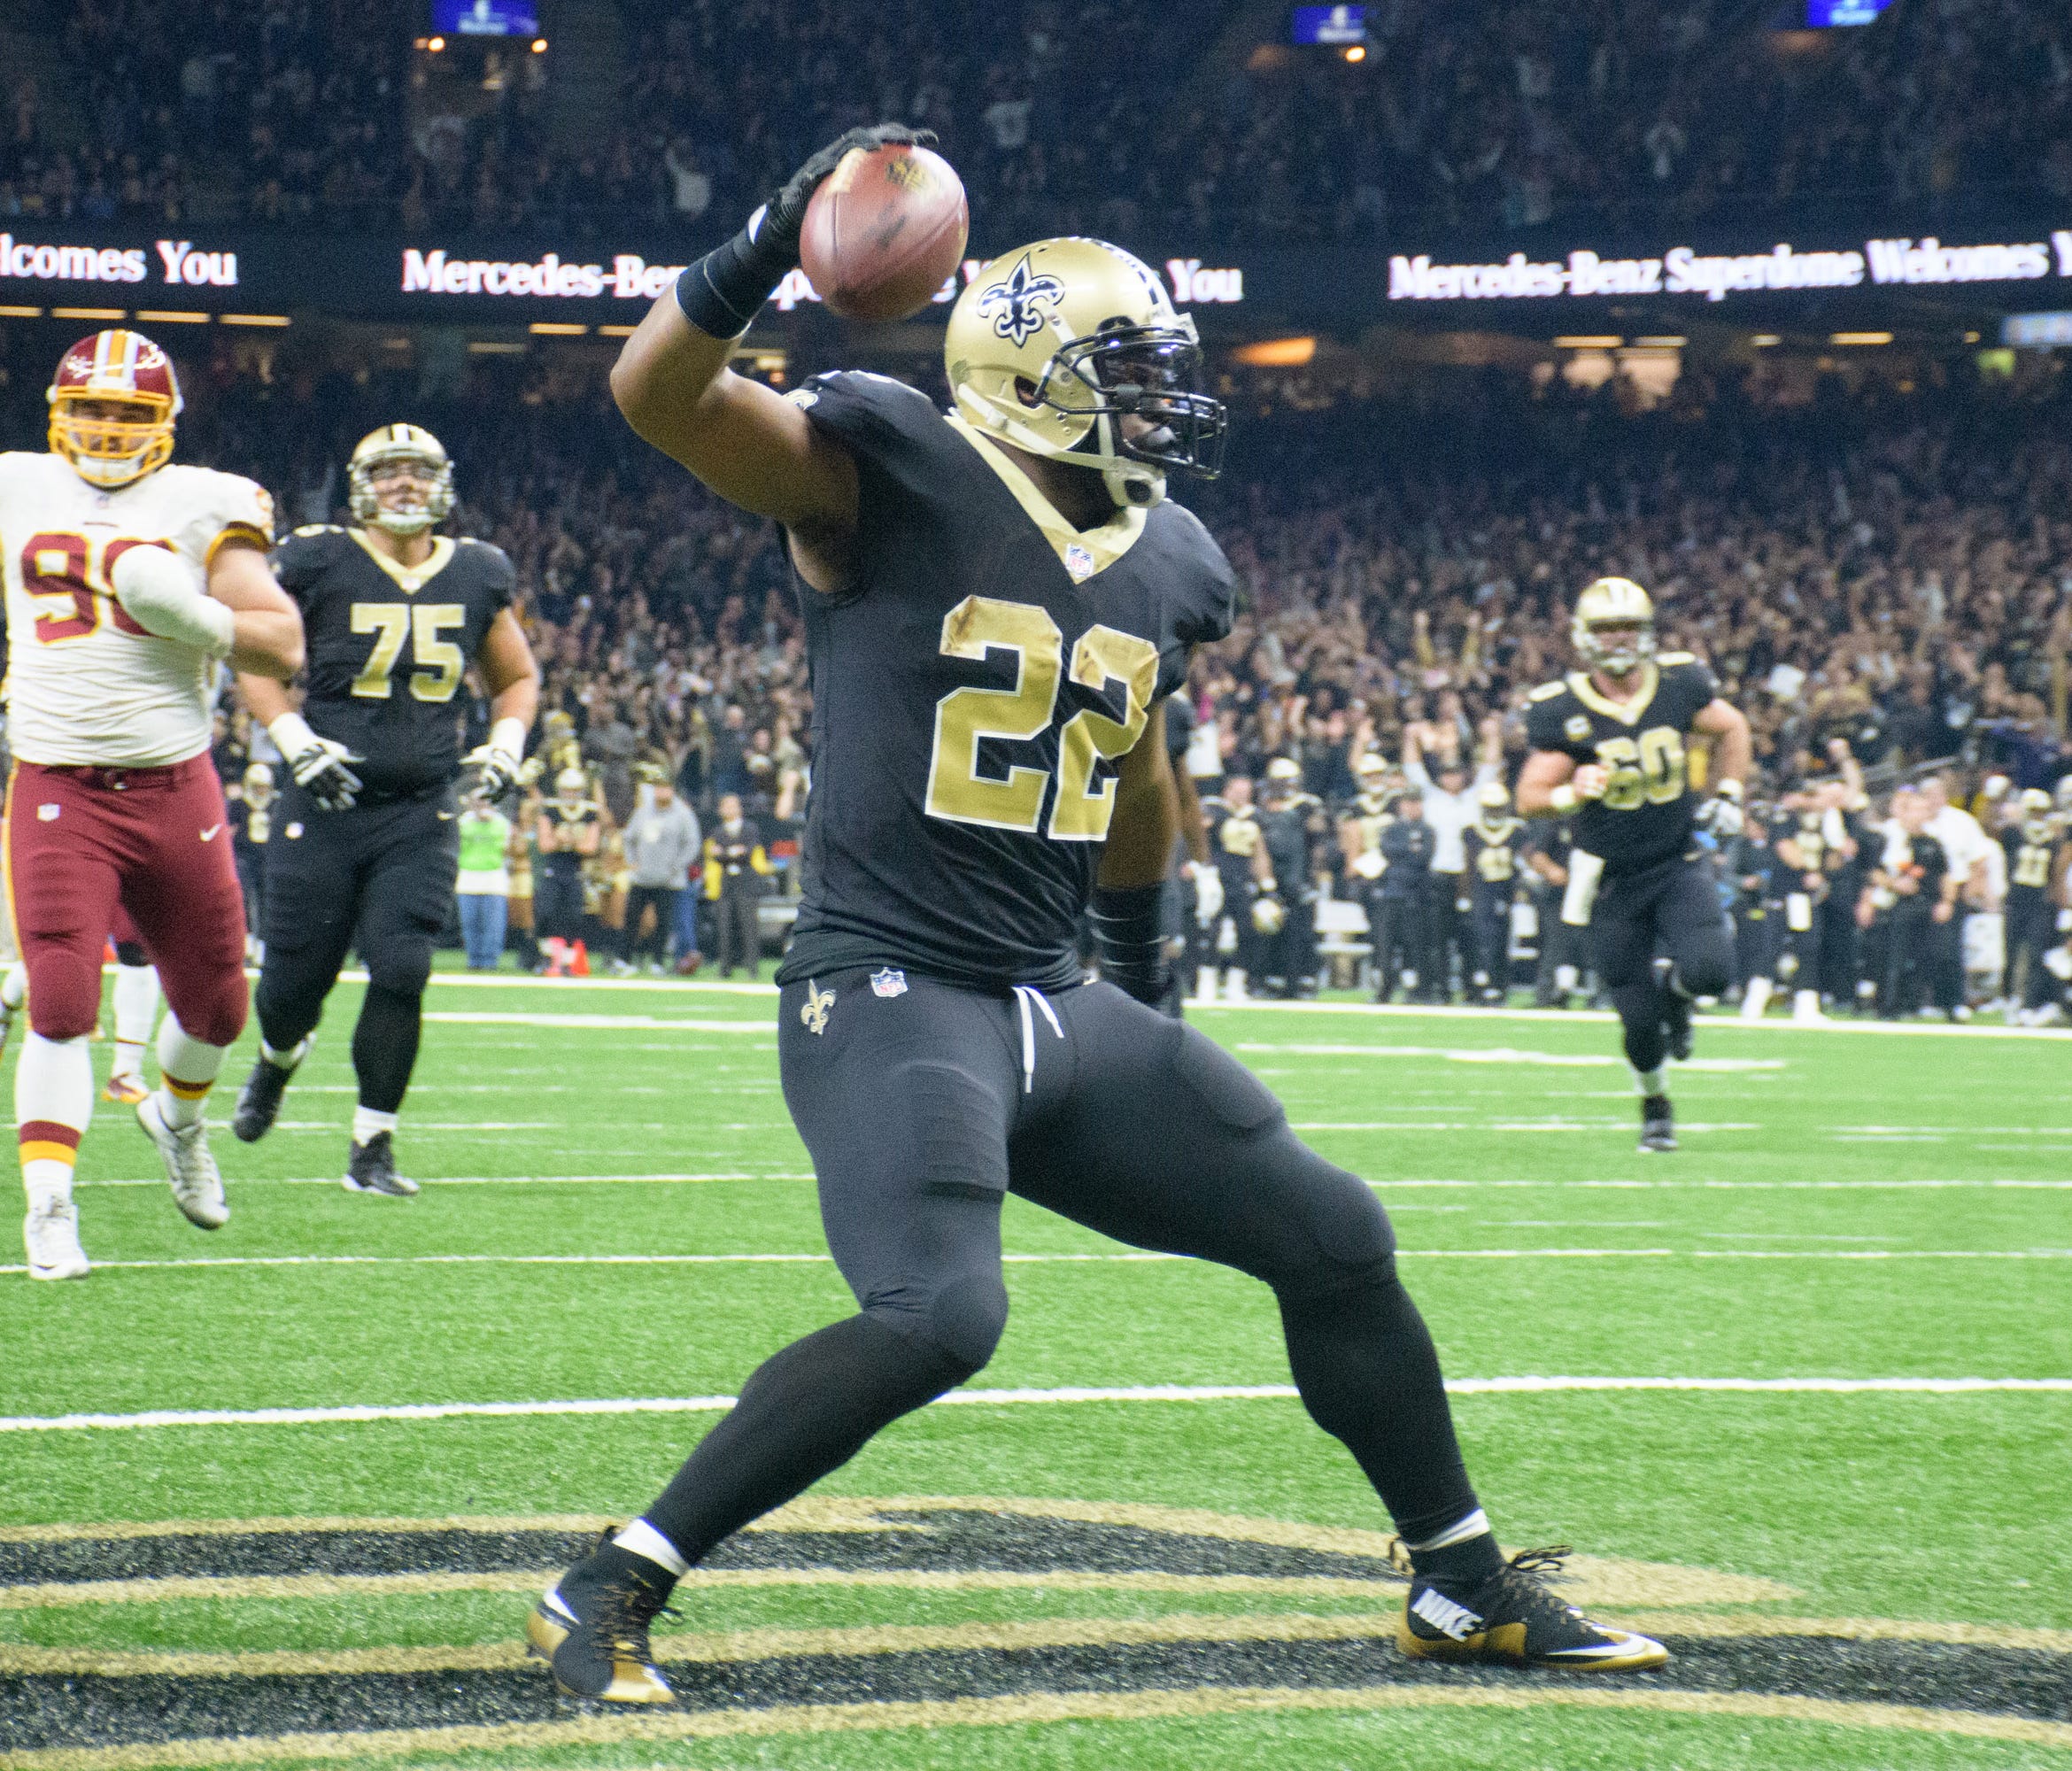 New Orleans Saints running back Mark Ingram after scoring a touchdown against the Washington Redskins in the NFL game at the Mercedes-Benz Superdome.